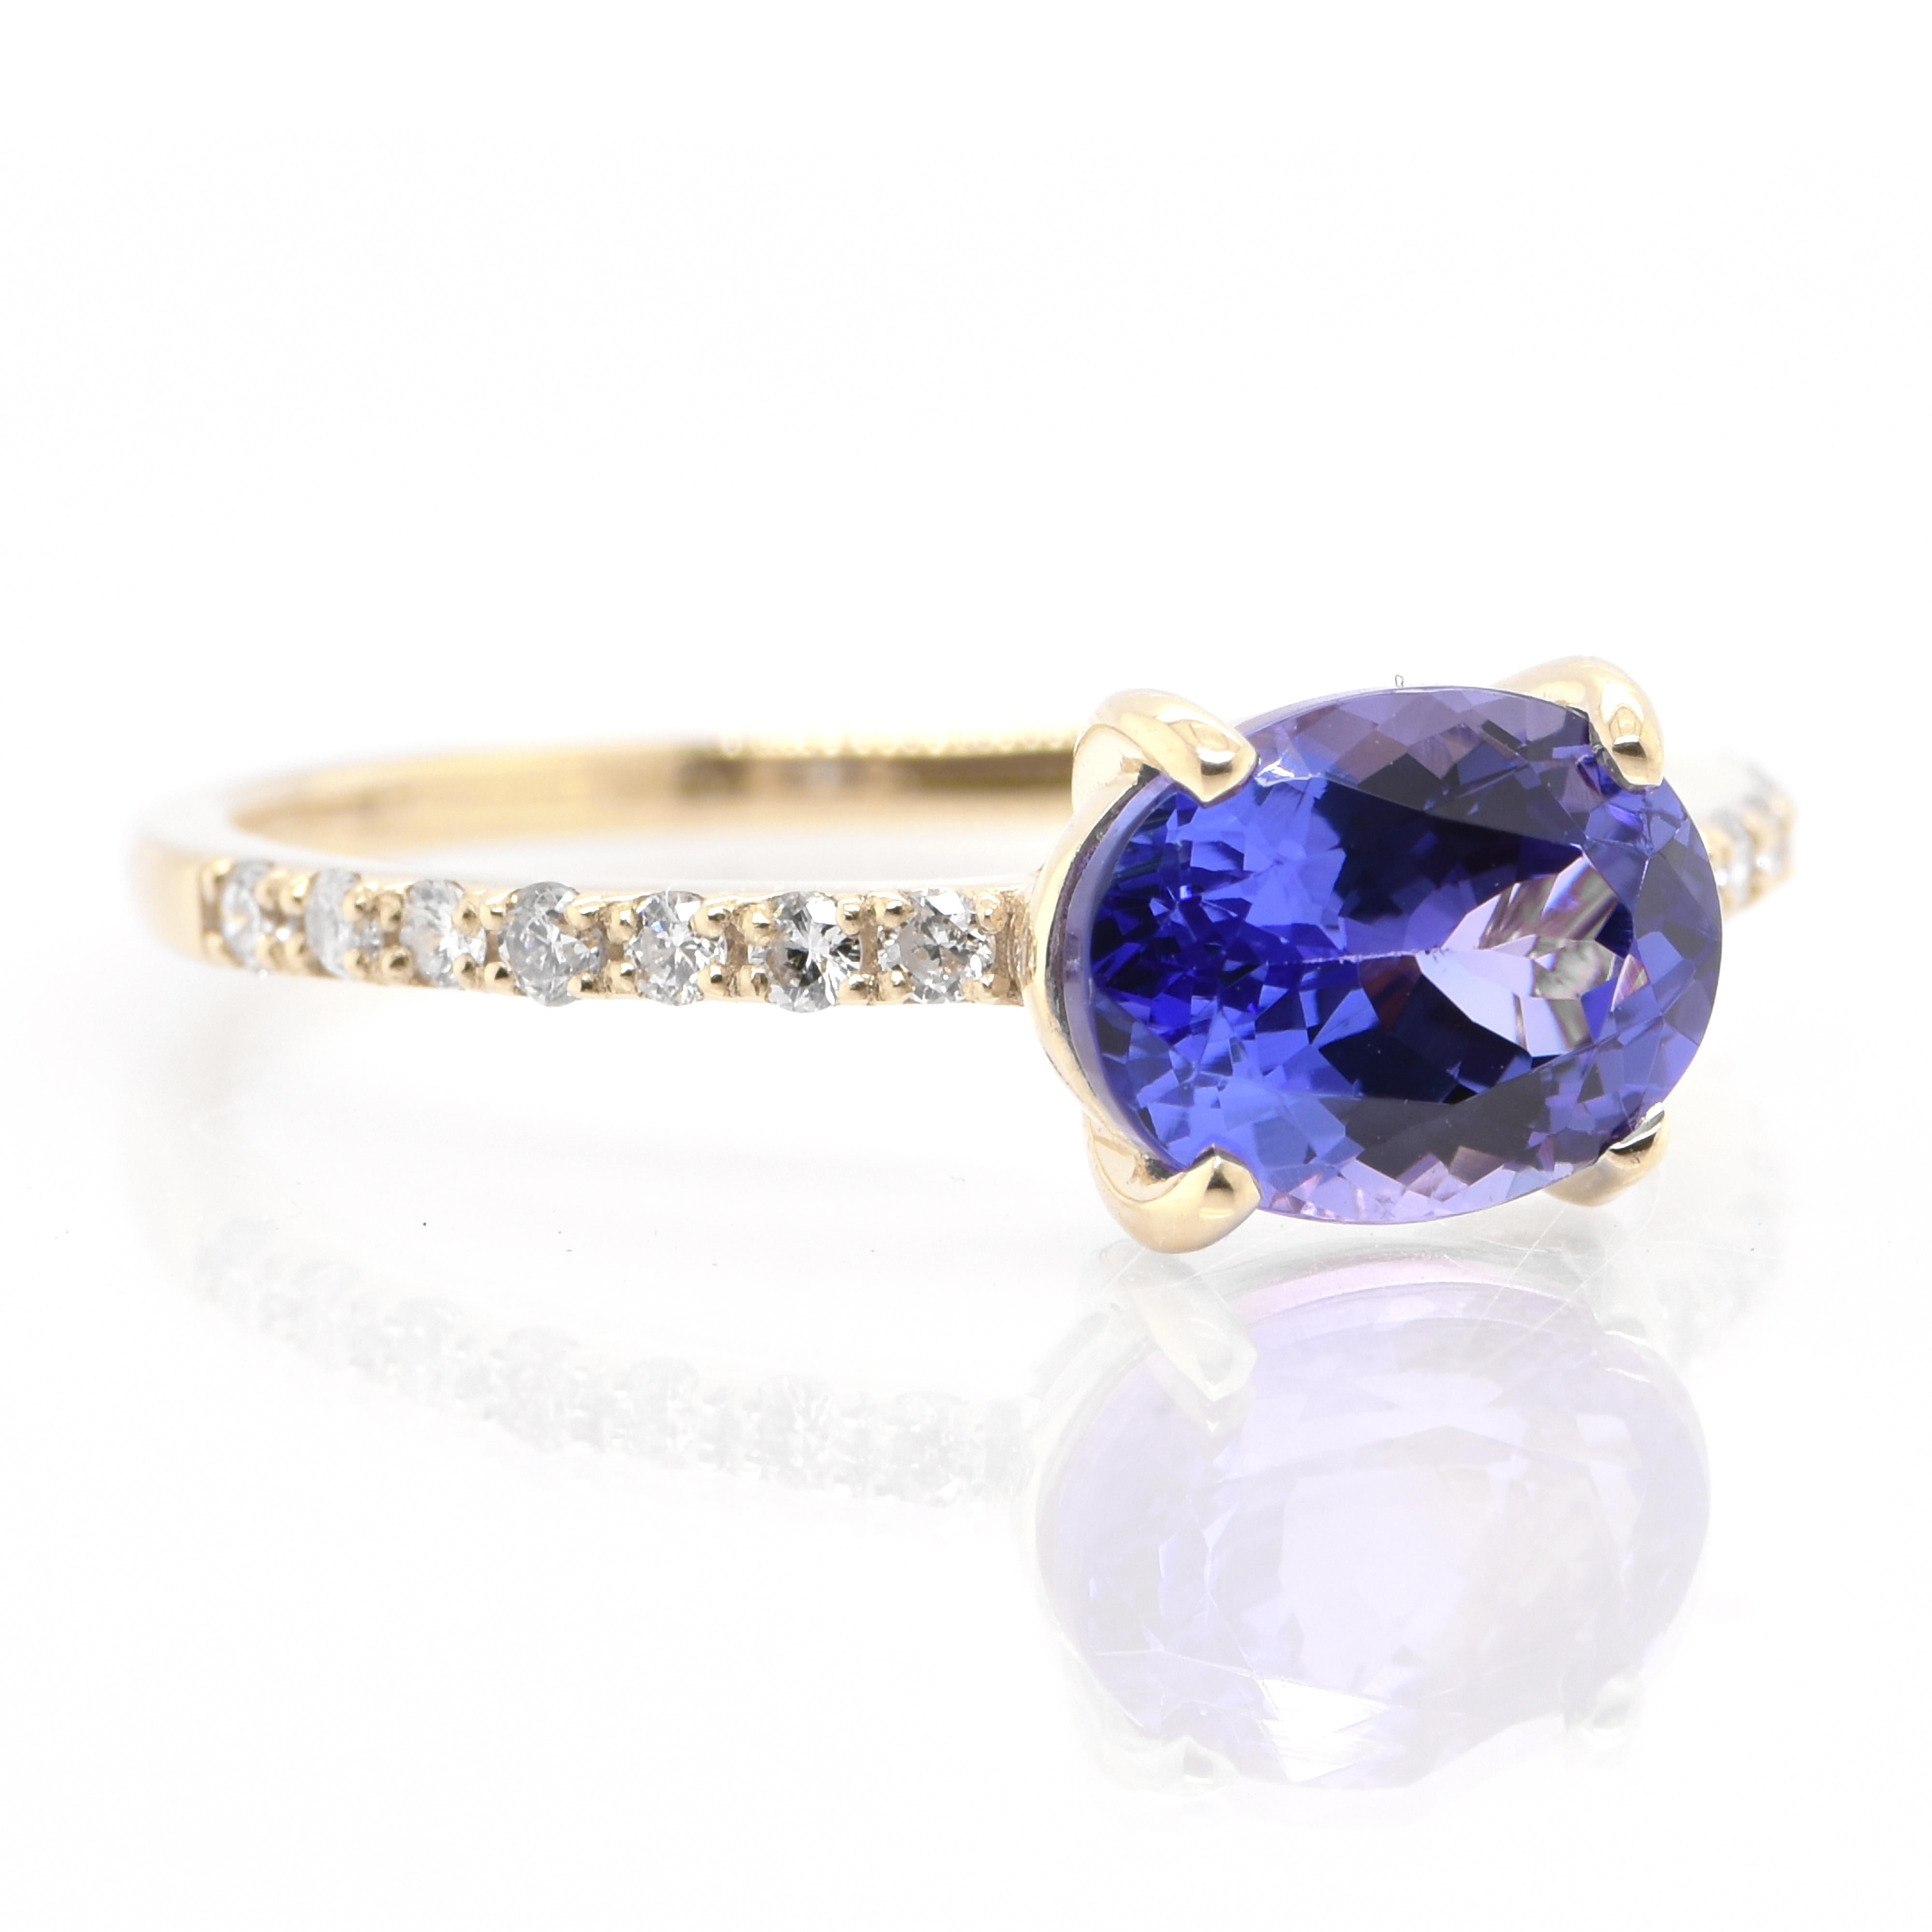 A beautiful Engagement Ring featuring a 1.70 Carat Natural Tanzanite and 0.14 Carats of Diamond Accents set in 18 Karat Yellow Gold. Tanzanite's name was given by Tiffany and Co after its only known source: Tanzania. Tanzanite displays beautiful